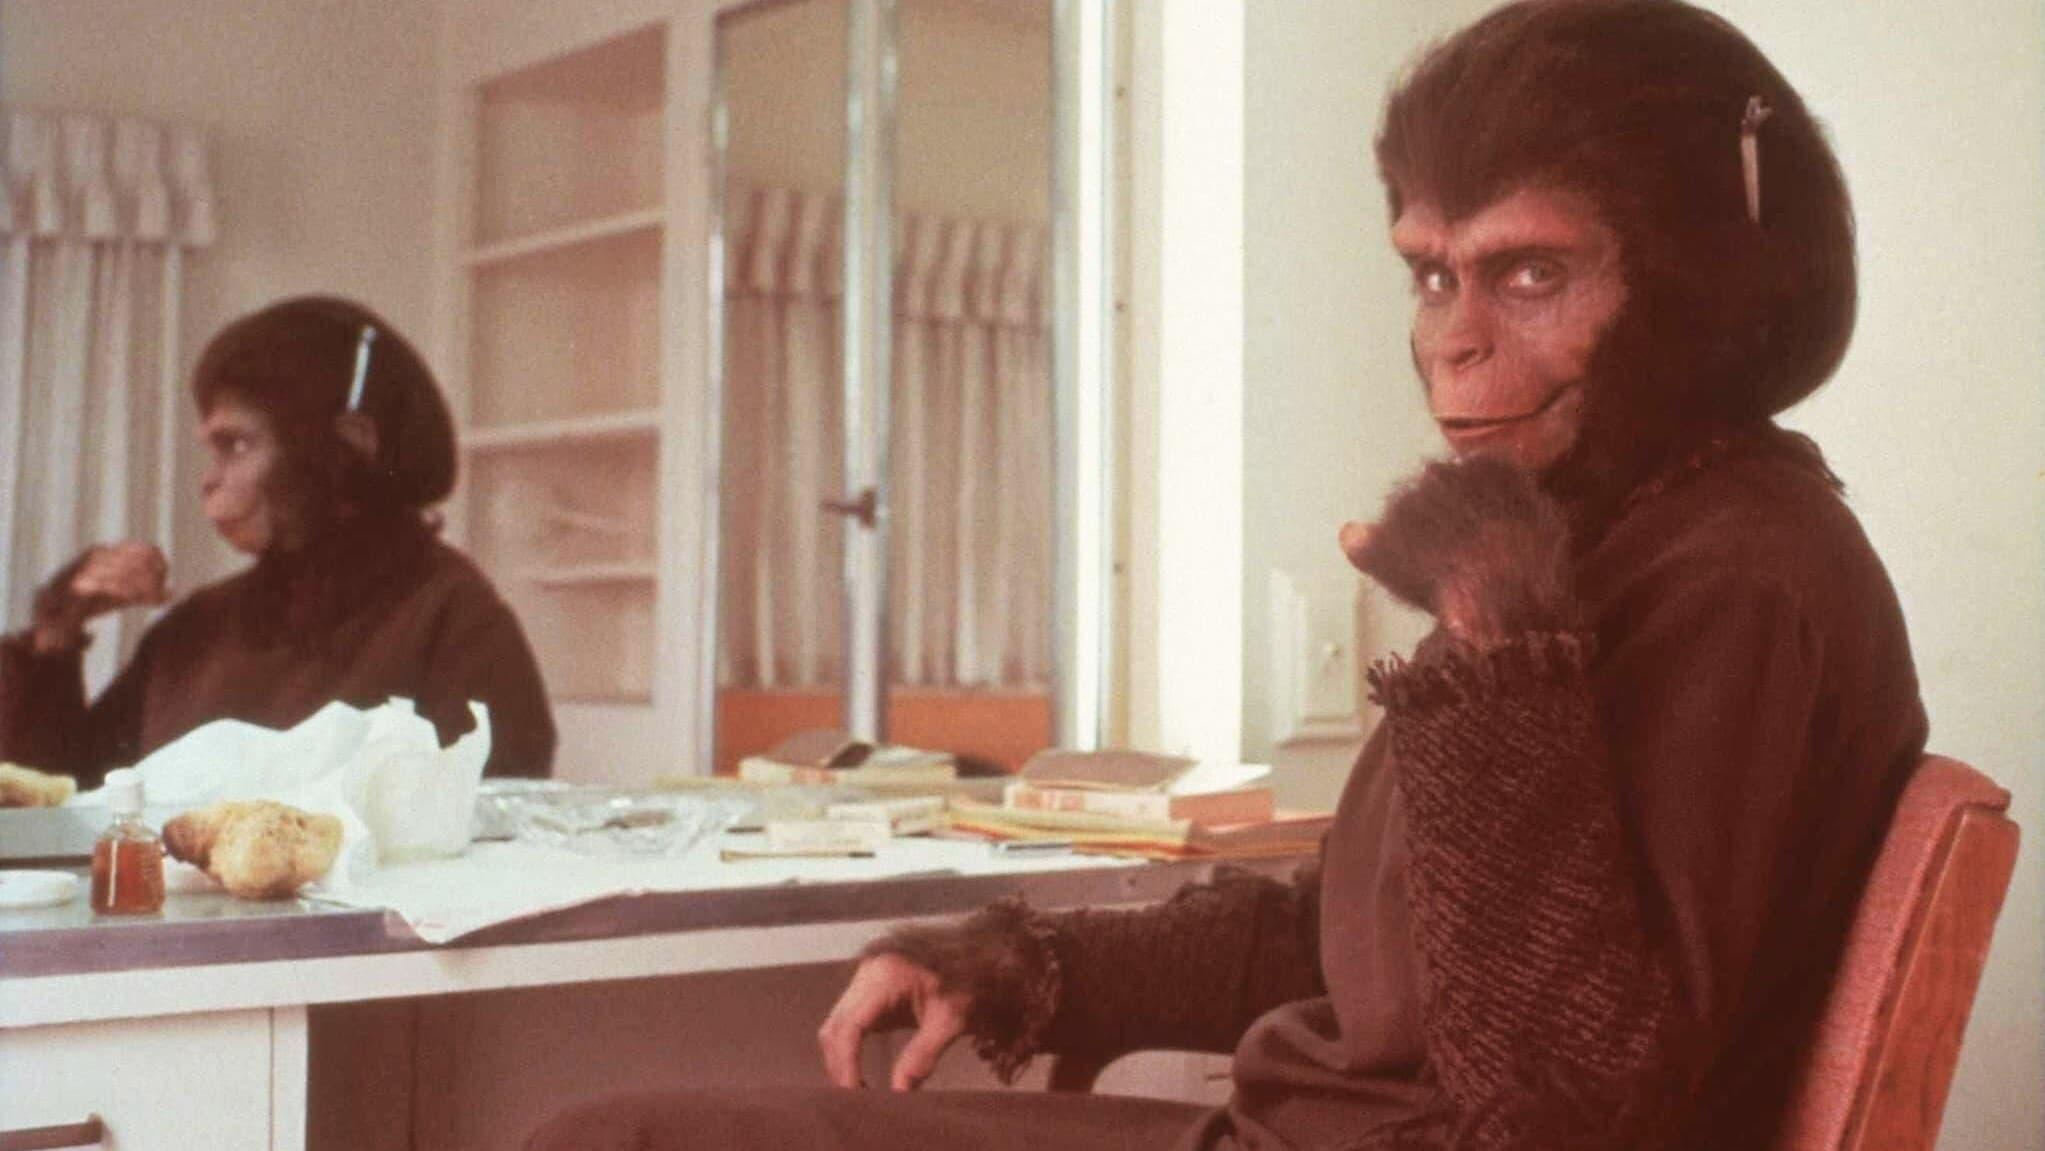 Behind the Planet of the Apes backdrop